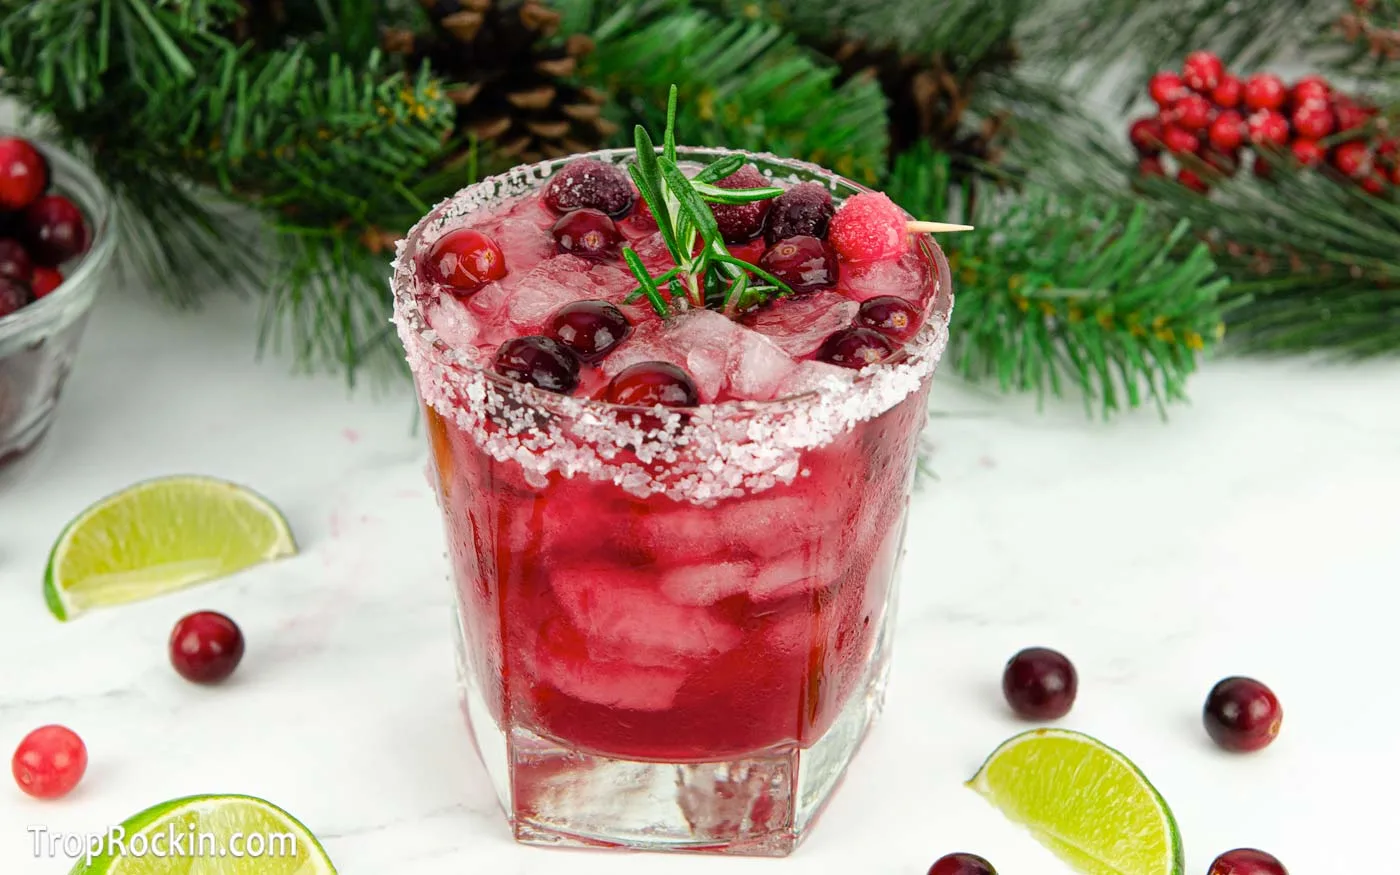 Christmas margarita garnished with cranberries and a rosemary sprig. Limes and cranberries scattered on counter top wih Christmas greenery in the background.